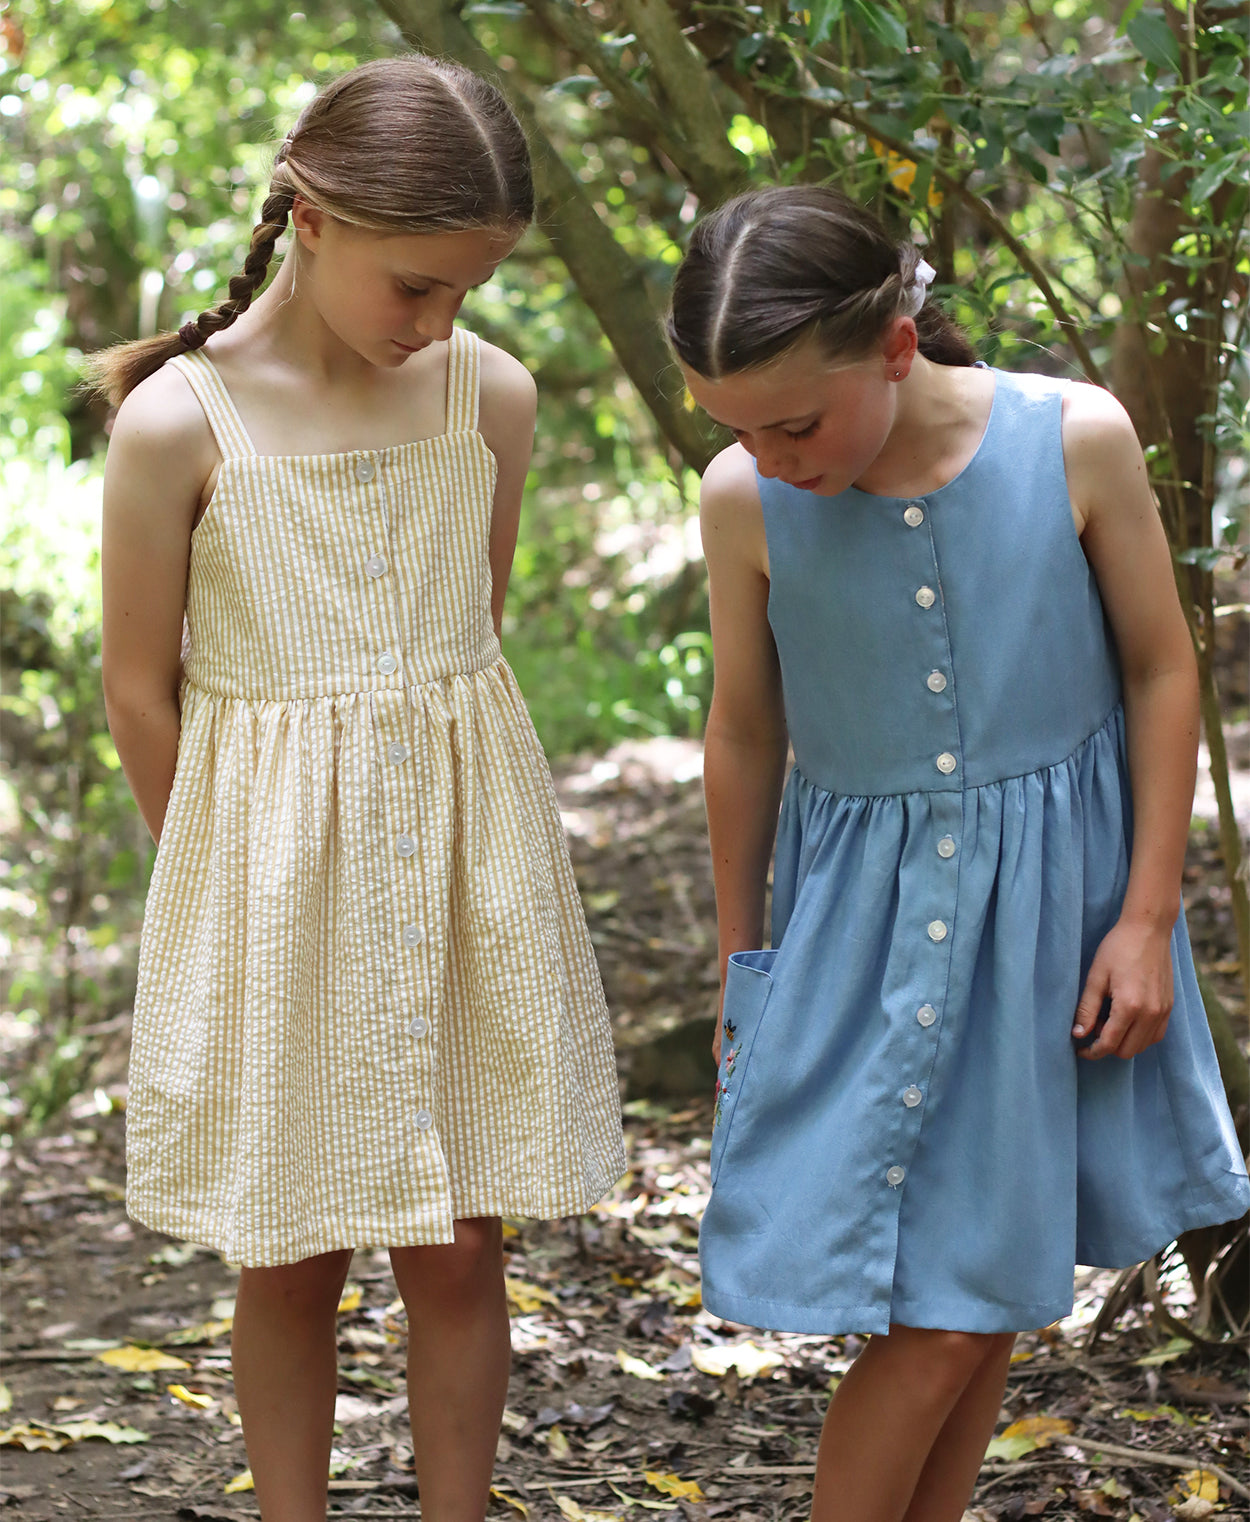 Children wearing the Baby/Child/Teen Rimu Dress sewing pattern from Below the Kowhai on The Fold Line. A relaxed fitting, sleeveless dress pattern made in chambray, lawn, linen, rayon, seersucker, tencel, viscose and voile fabrics, featuring front button 